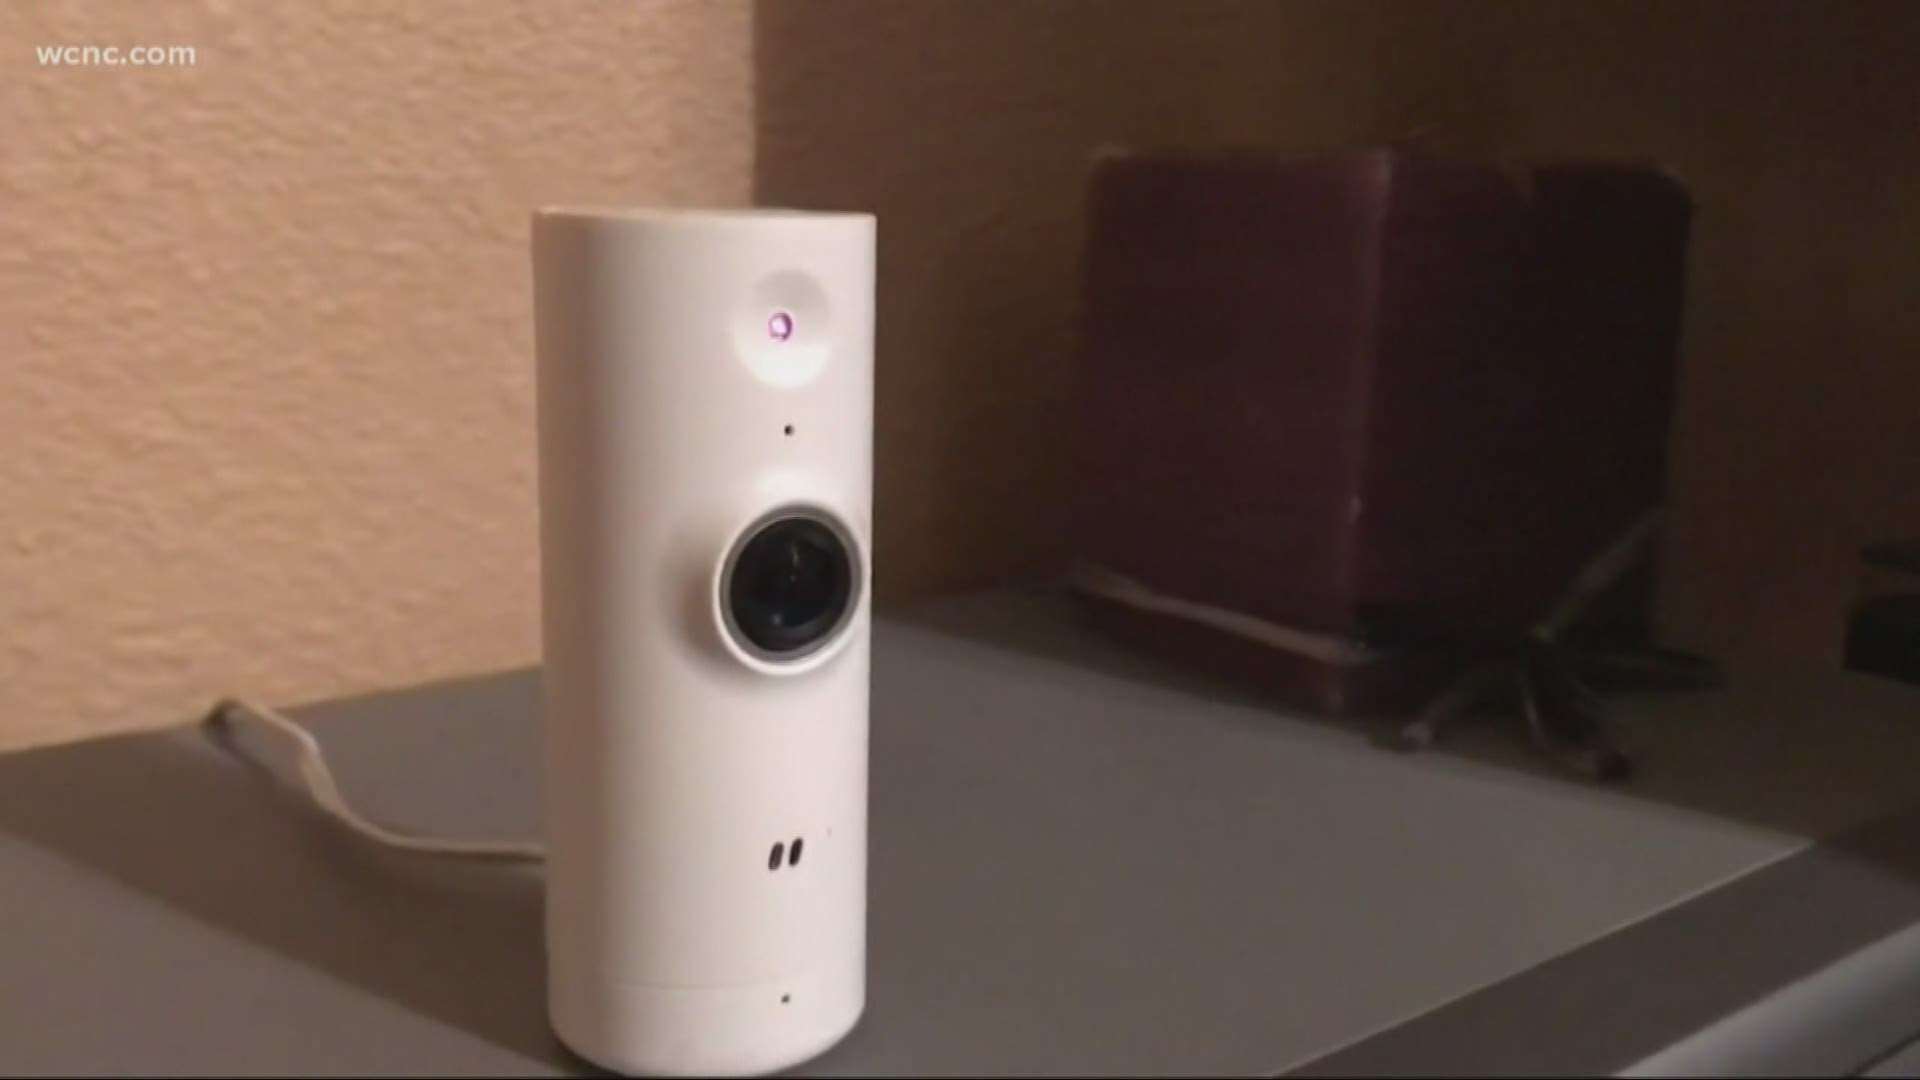 These kinds of cameras are affordable and easy to use. But -- as the study suggests -- buyer beware.